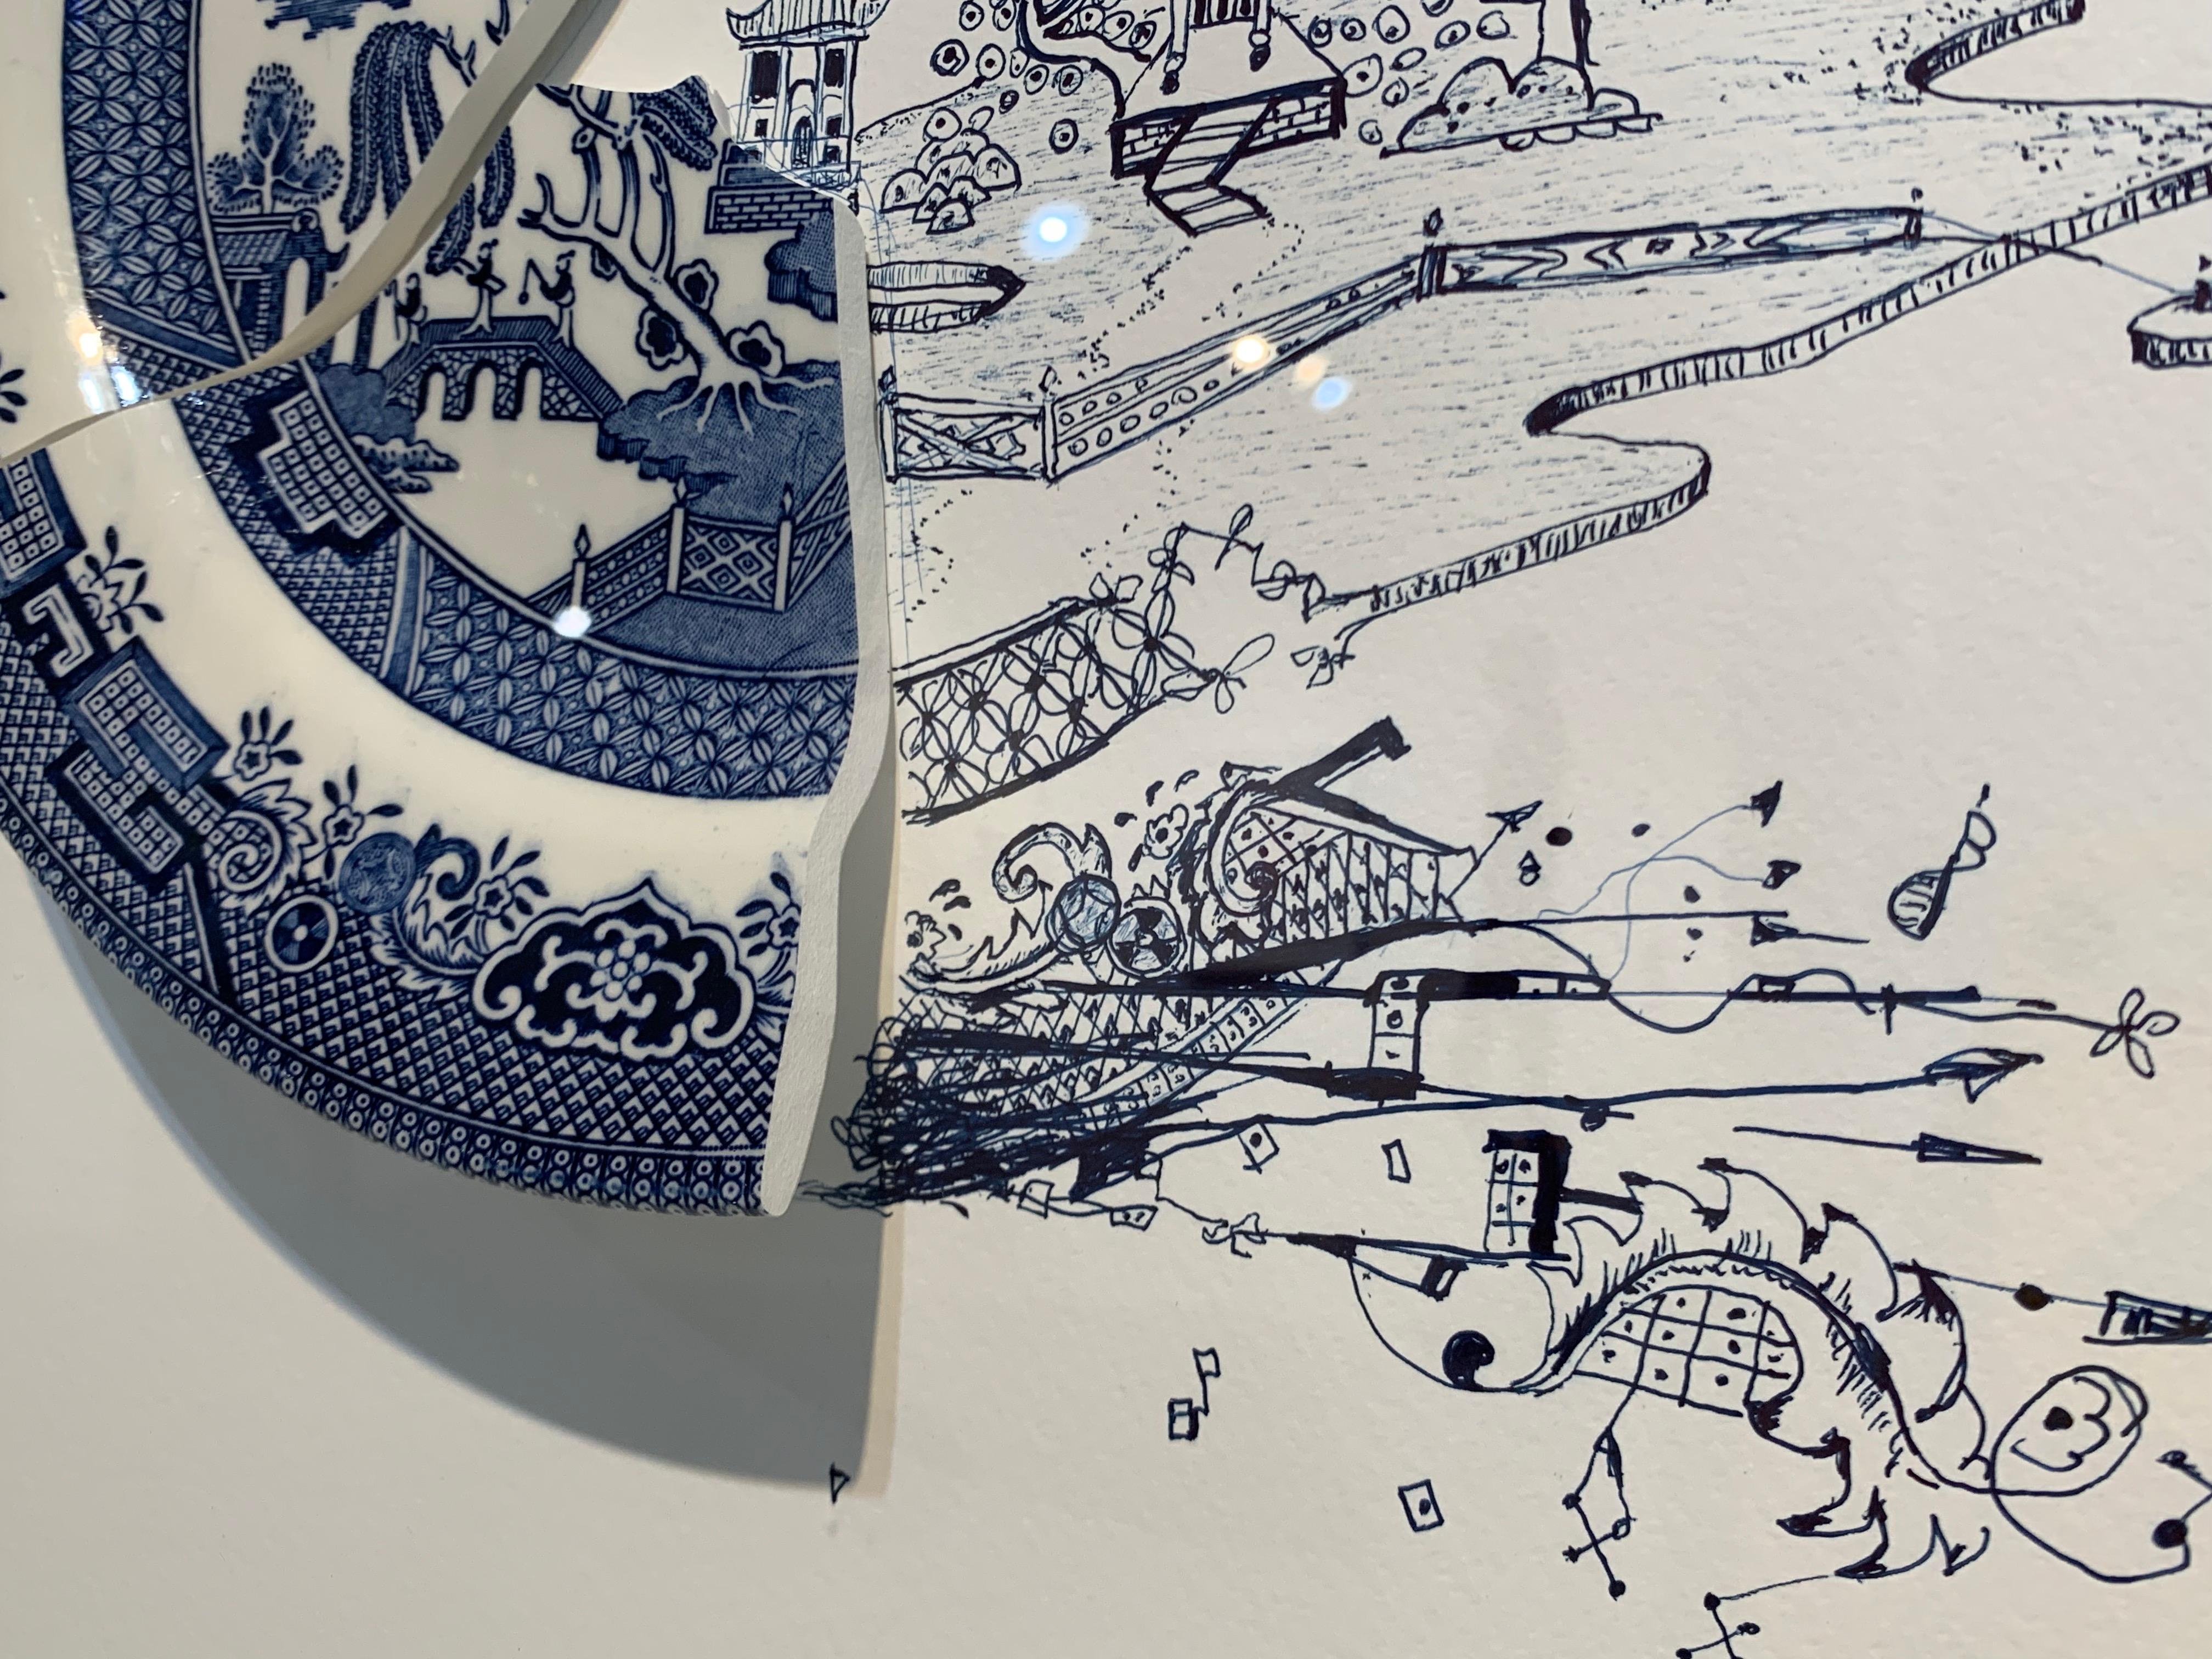 Fragmented in Blue with Bridges and Bird in Flight 3